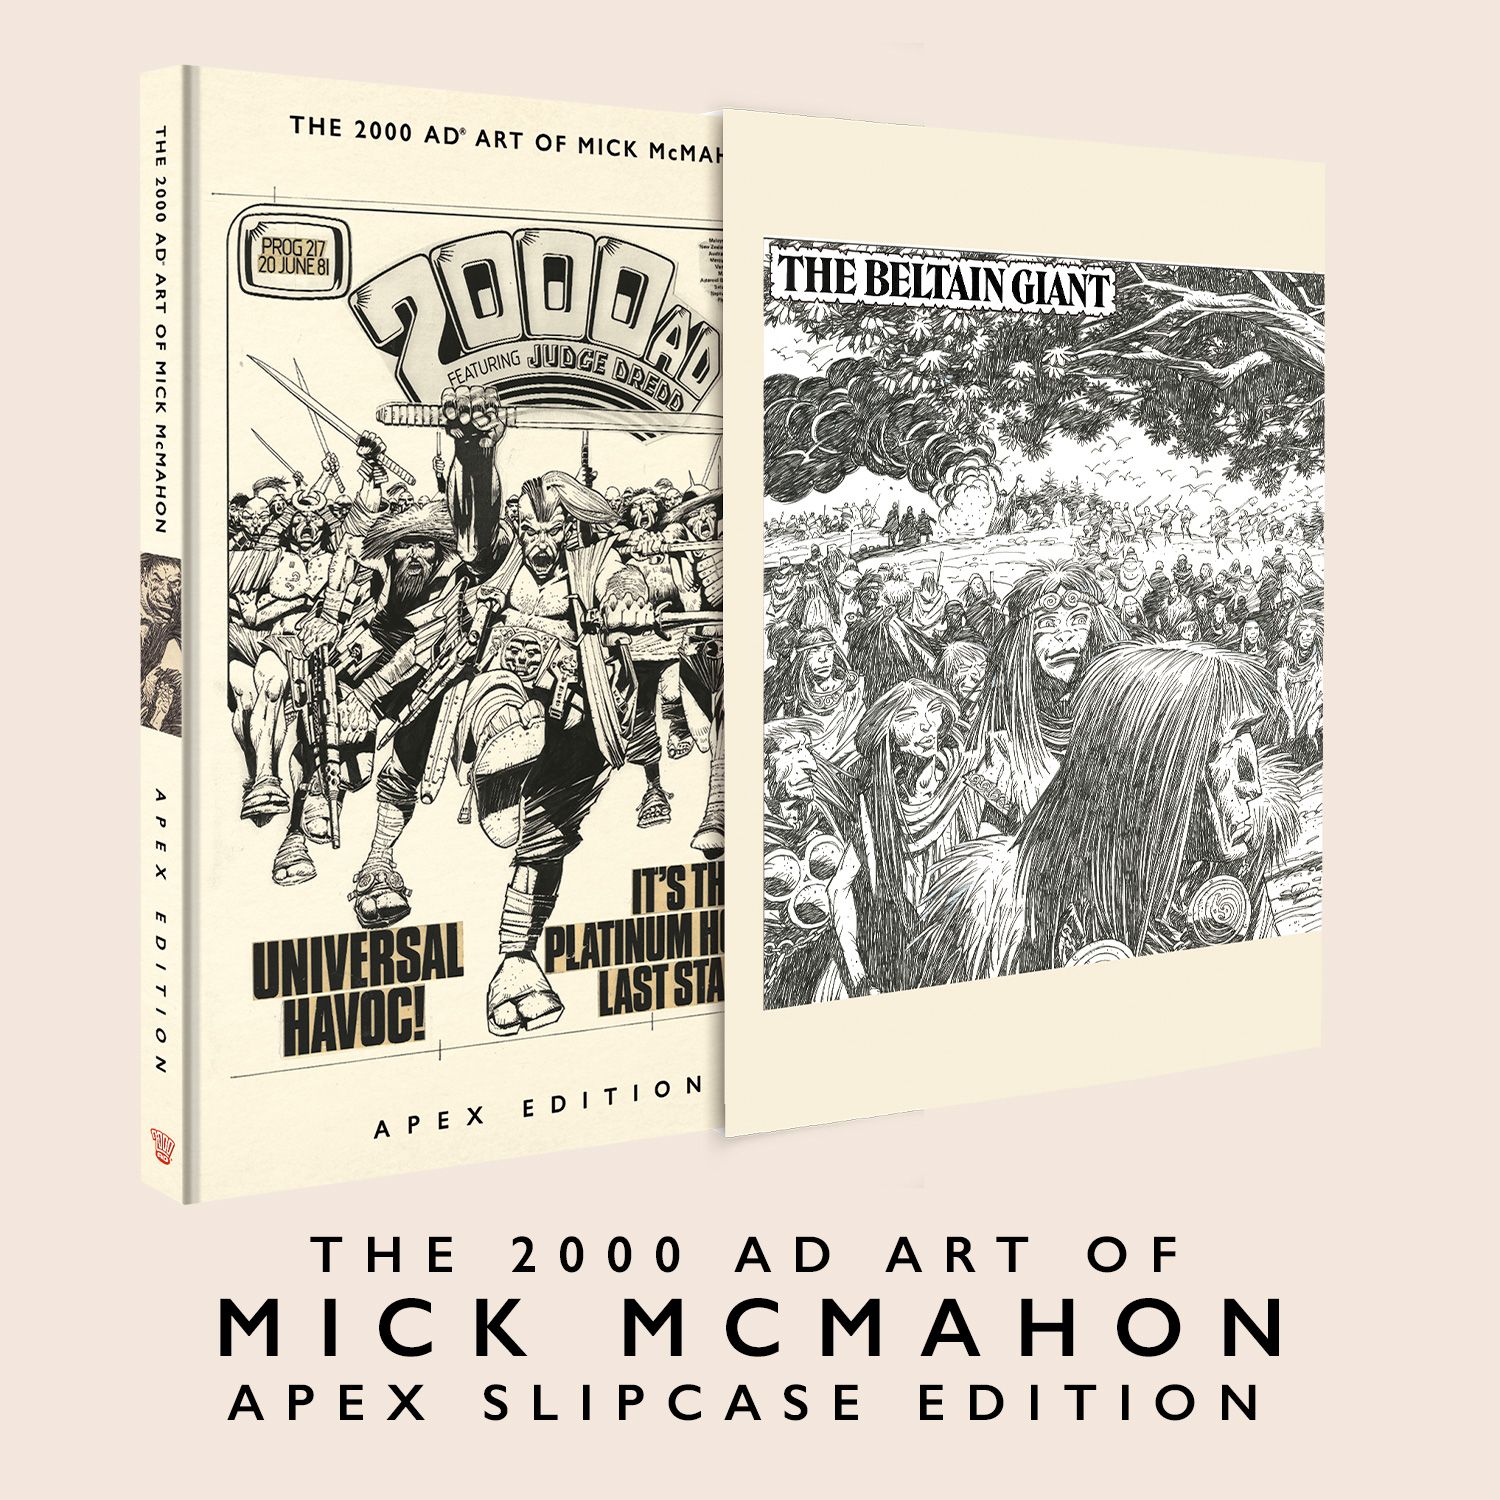 Out Now! The 2000 AD Art of Mick McMahon Apex Edition